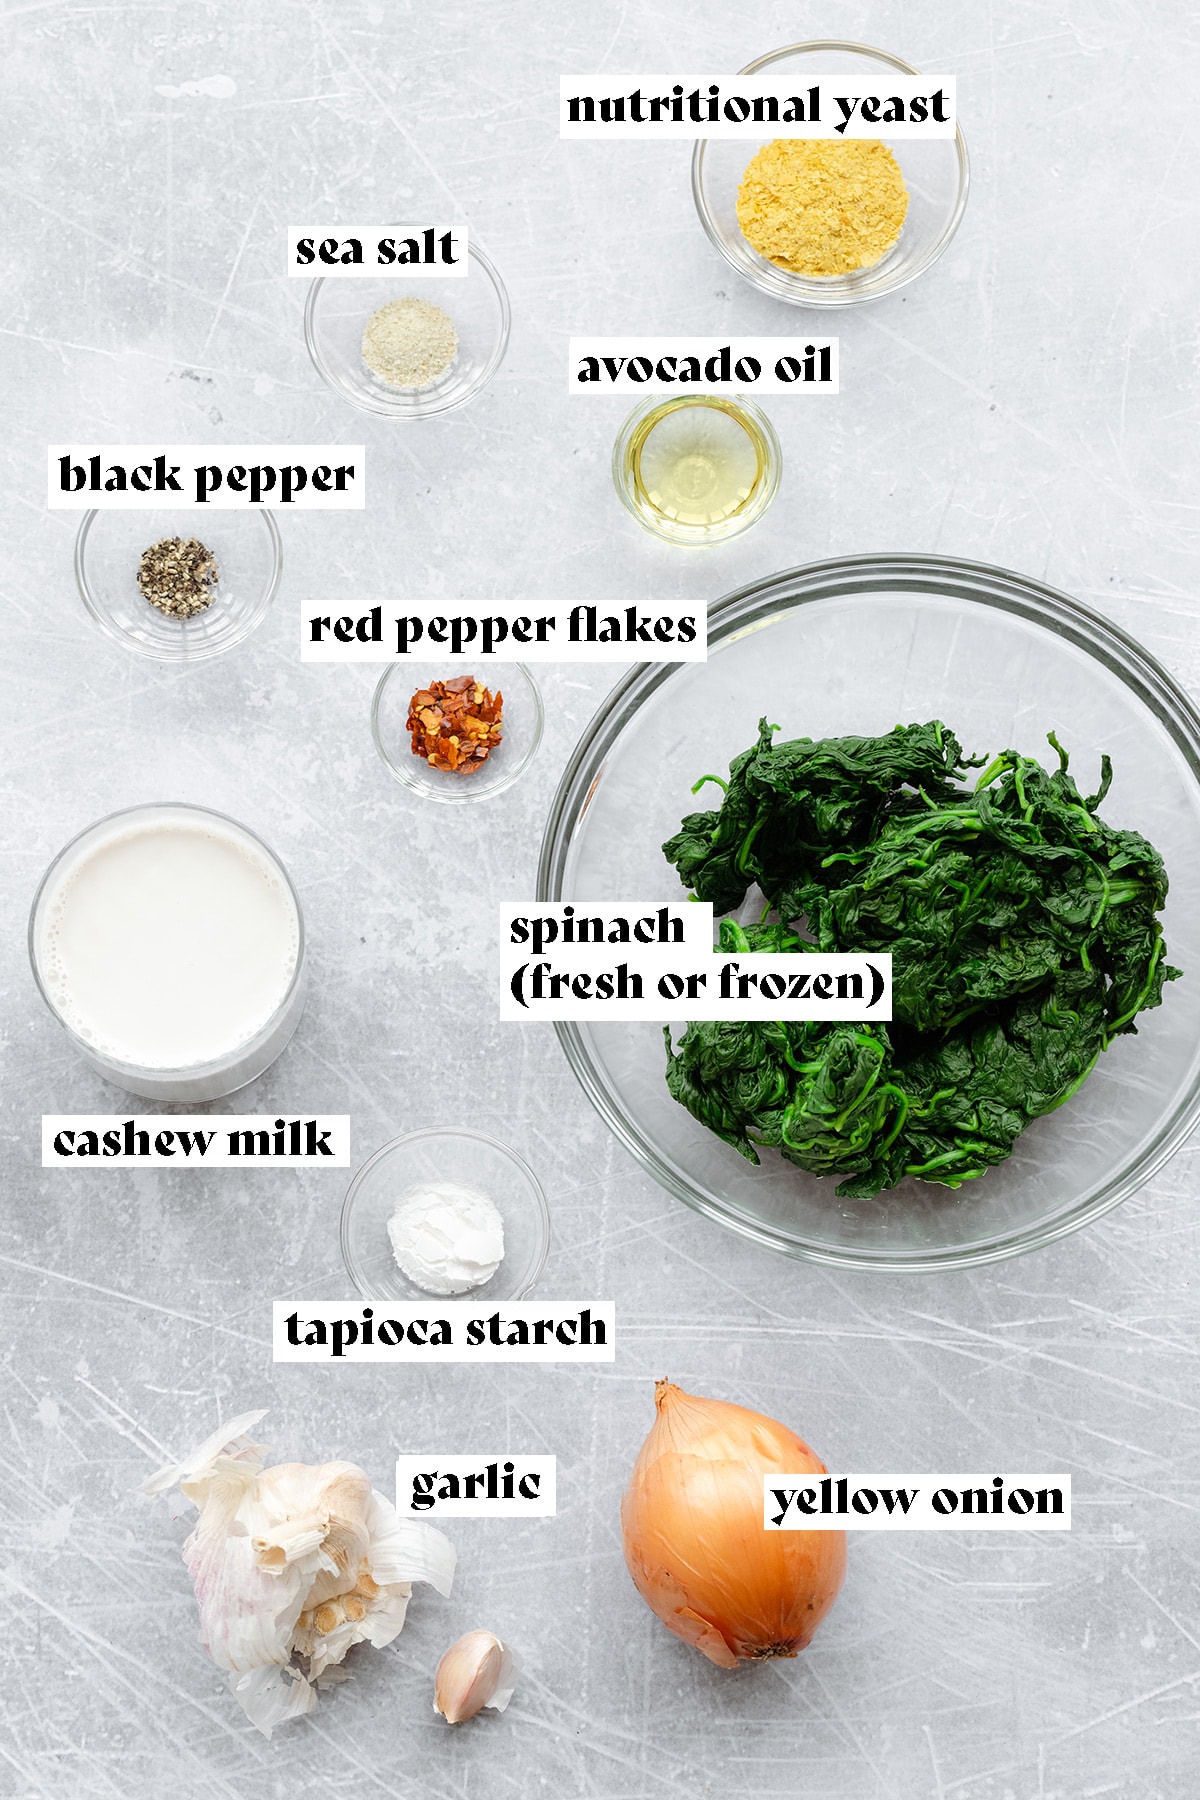 Ingtredients for vegan creamed spinach laid out on a scratched metal background.